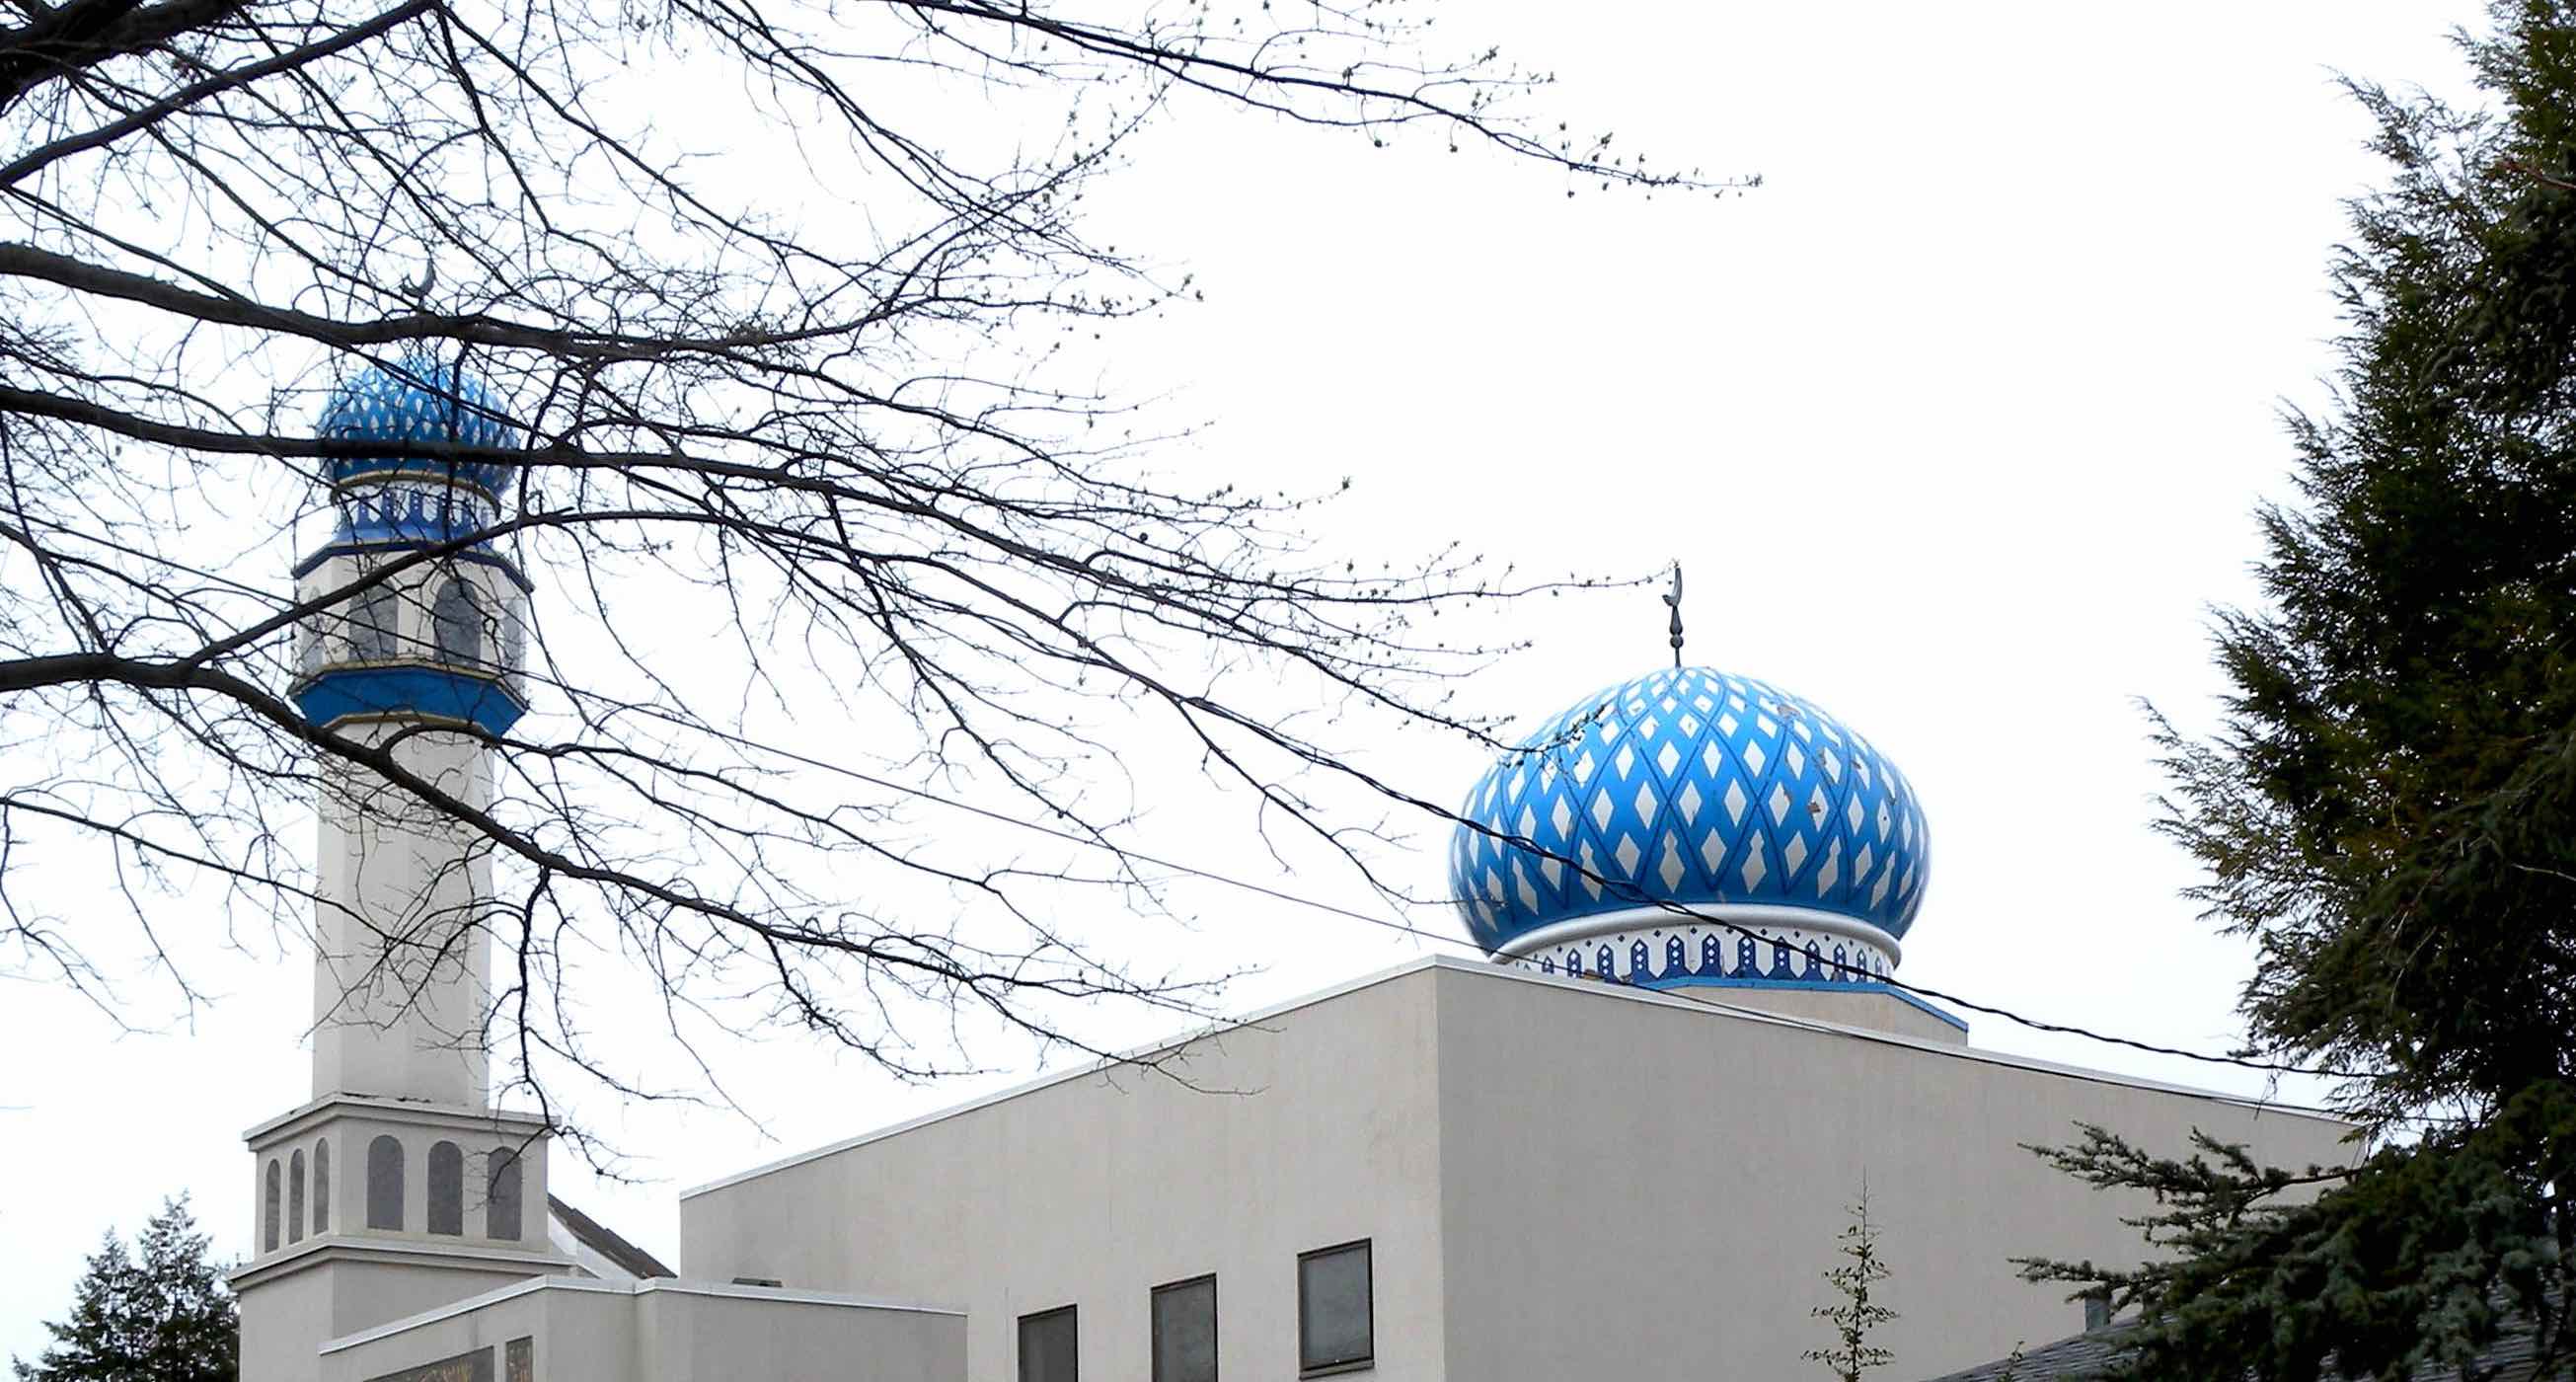 An American mosque with a blue dome